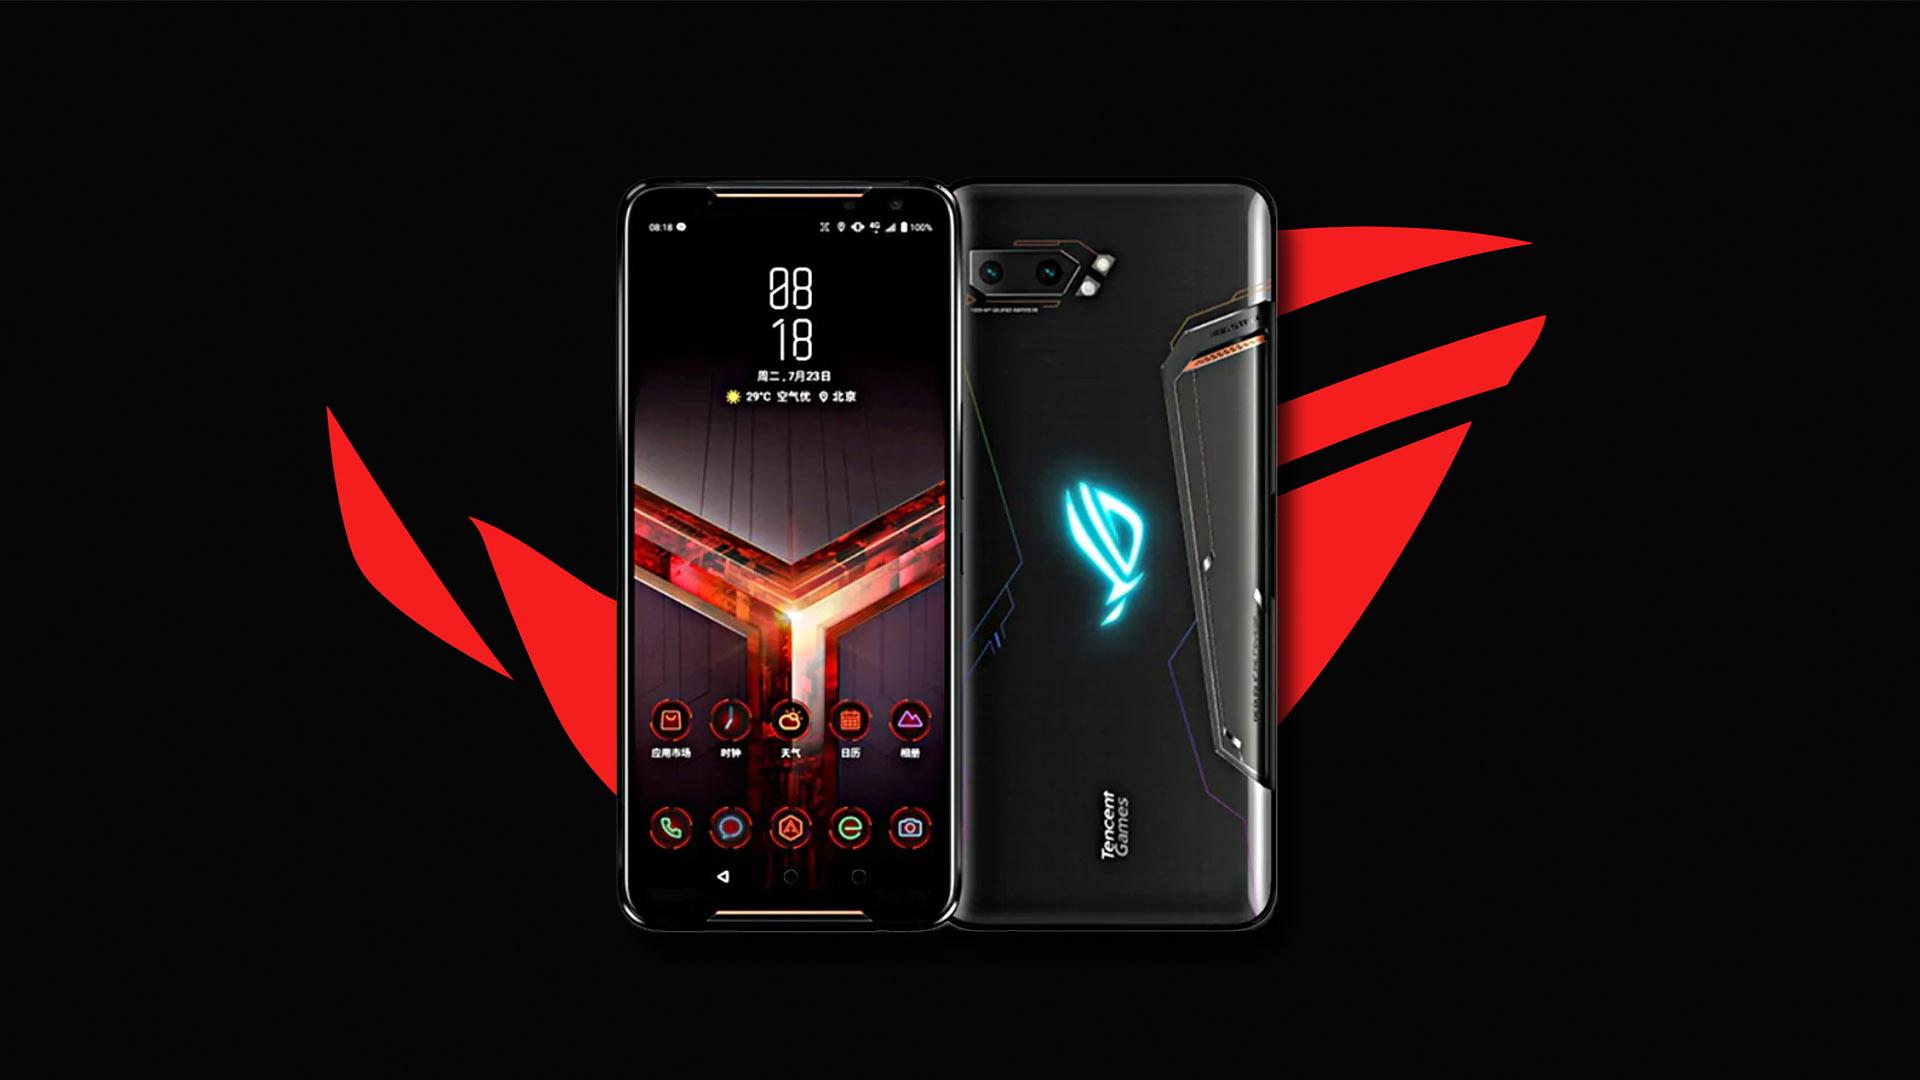 More information about "Αποκαλύφτηκε η τιμή του ASUS ROG Phone II, που έρχεται με 12GB RAM"